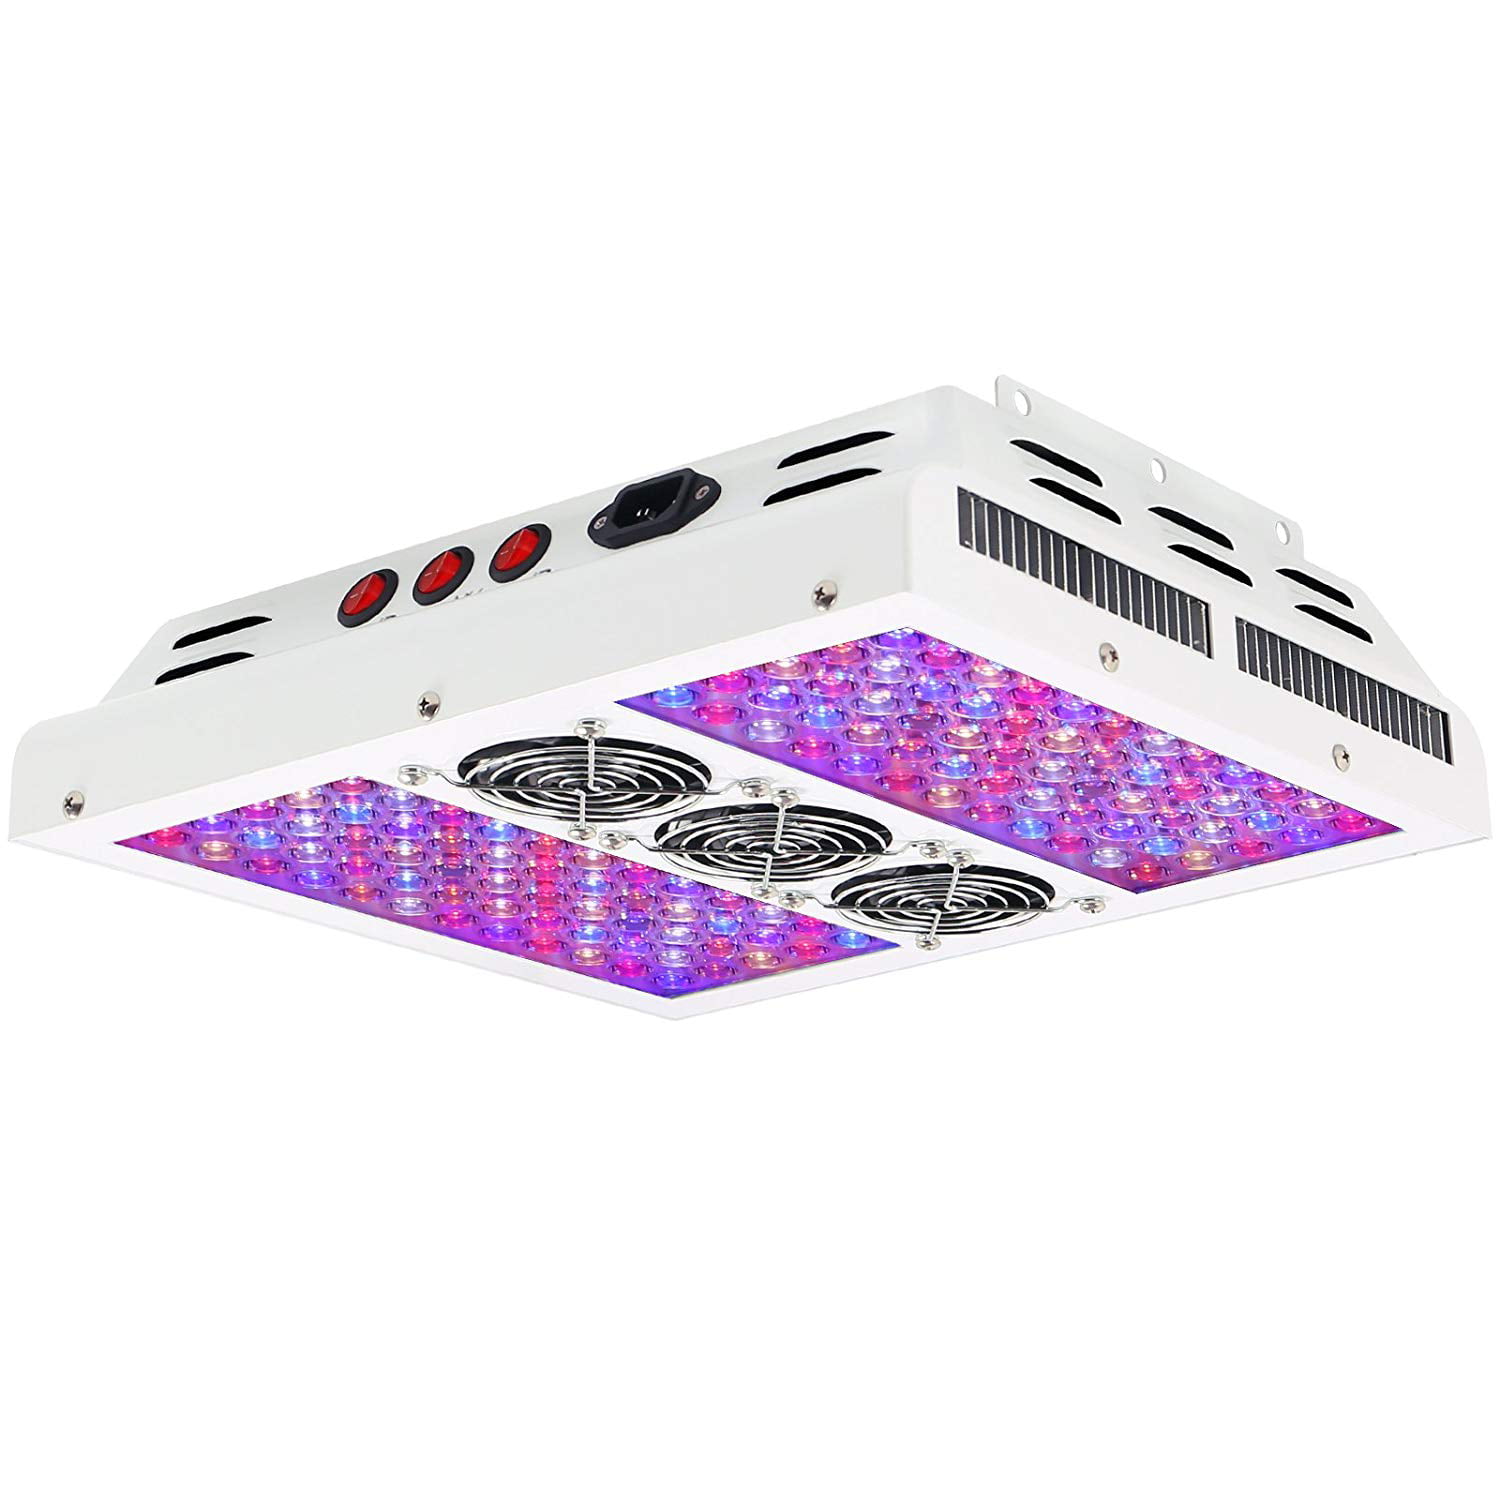 3-Switches Full Spectrum for VIPARSPECTRA PAR600 600W 12-band LED Grow Light 